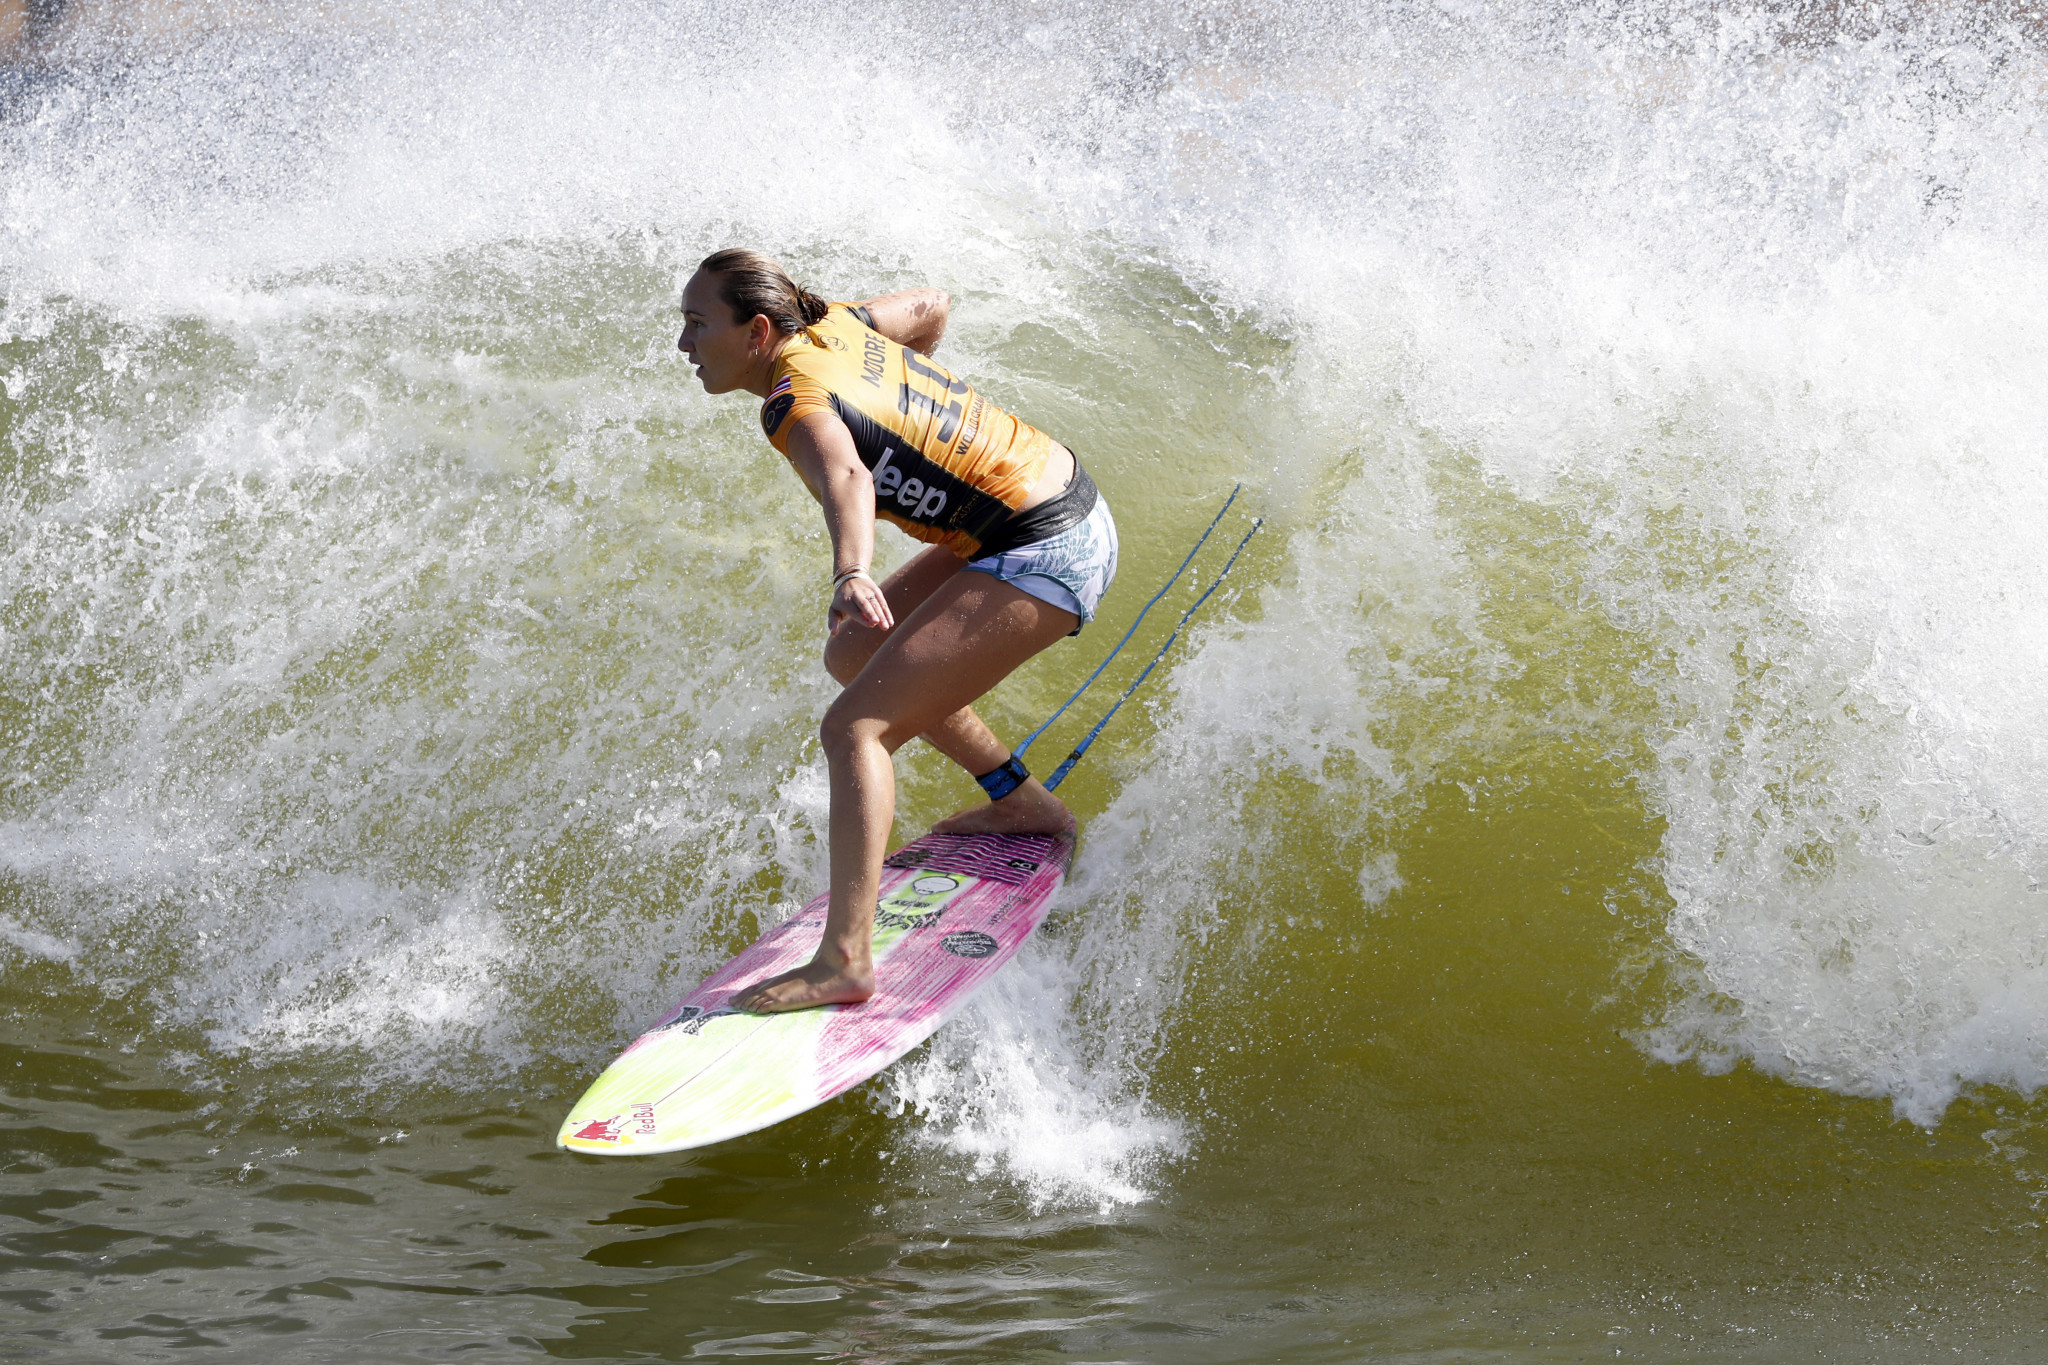 Four-time world champion Carissa Moore has been named on the United States surf team for Tokyo 2020 ©Getty Images 